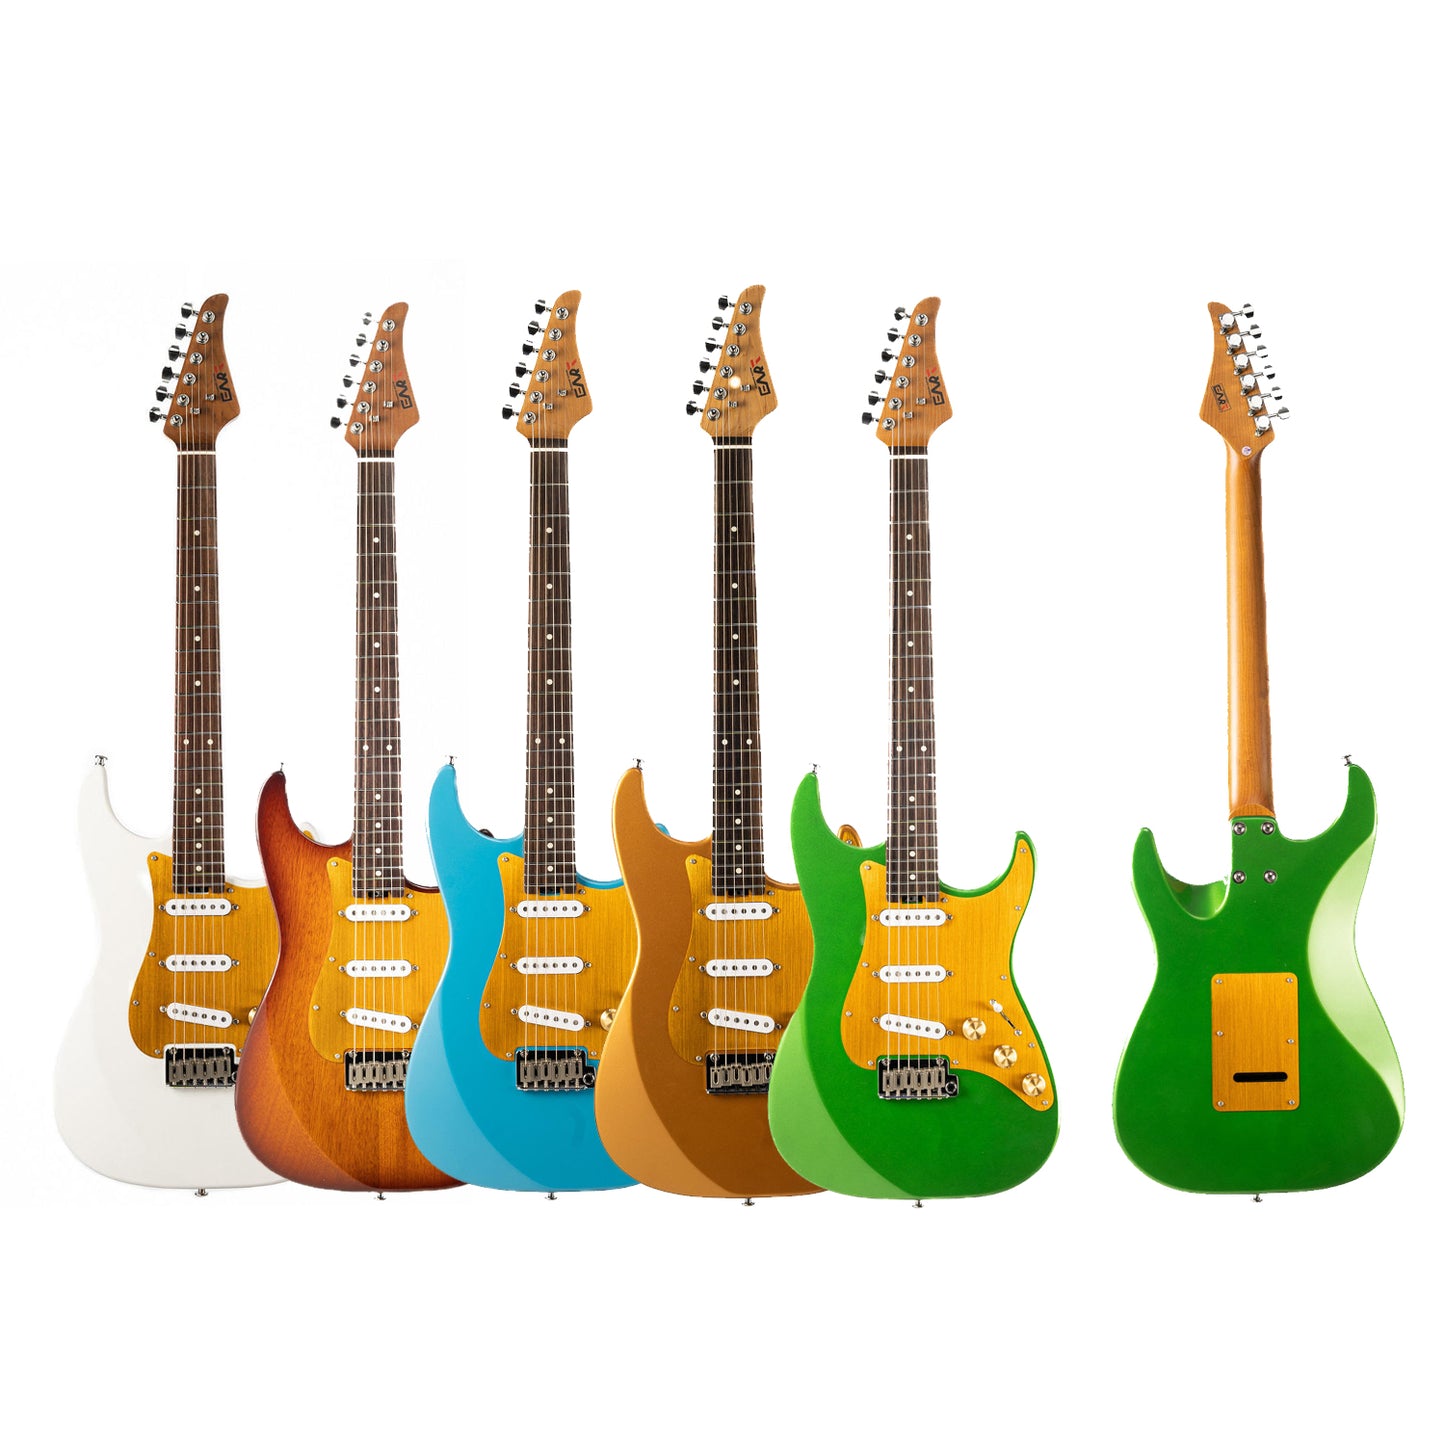 EART Guitars Rocking-65 Electric Guitar, Roasted Maple Neck, Modern 2-Point Synchronized Tremolo